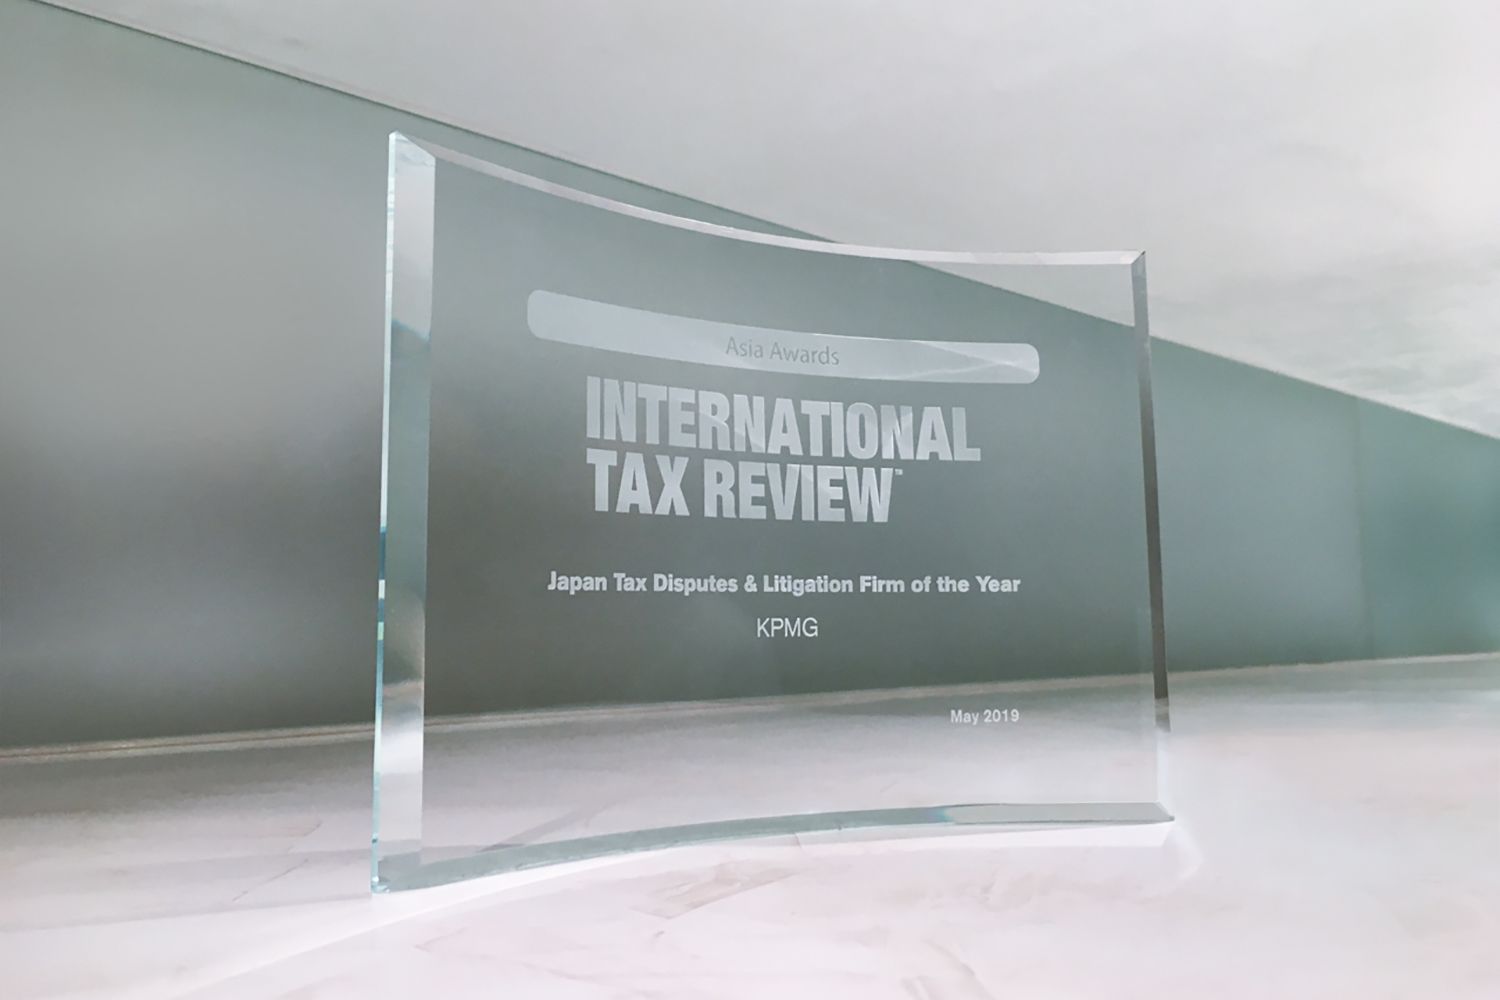 Japan Tax Disputes & Litigation Firm of the Year